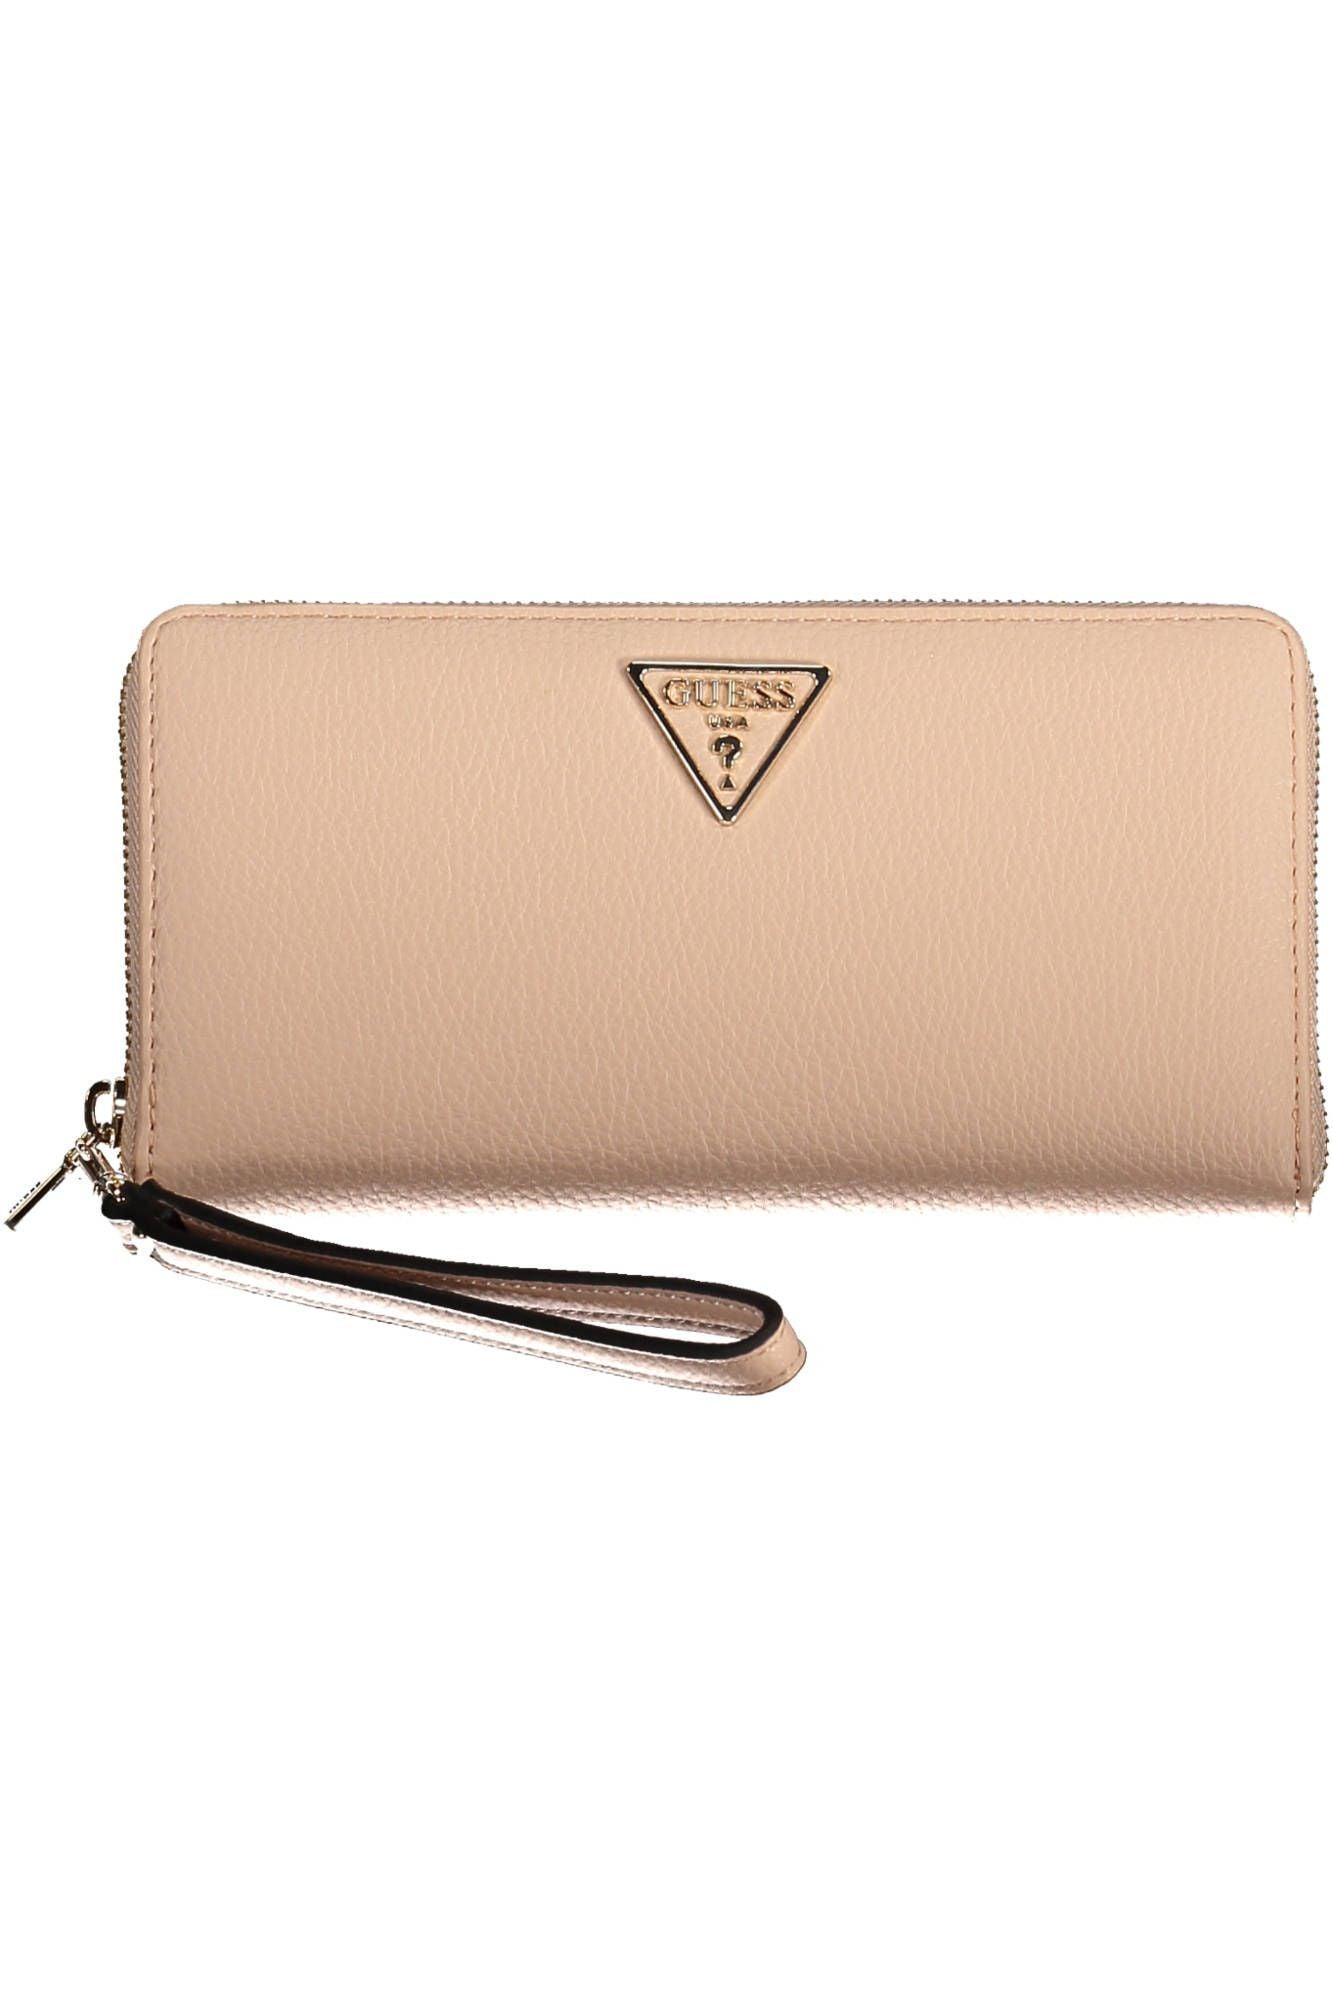 Guess Pink Polyurethane Wallet in Natural | Lyst